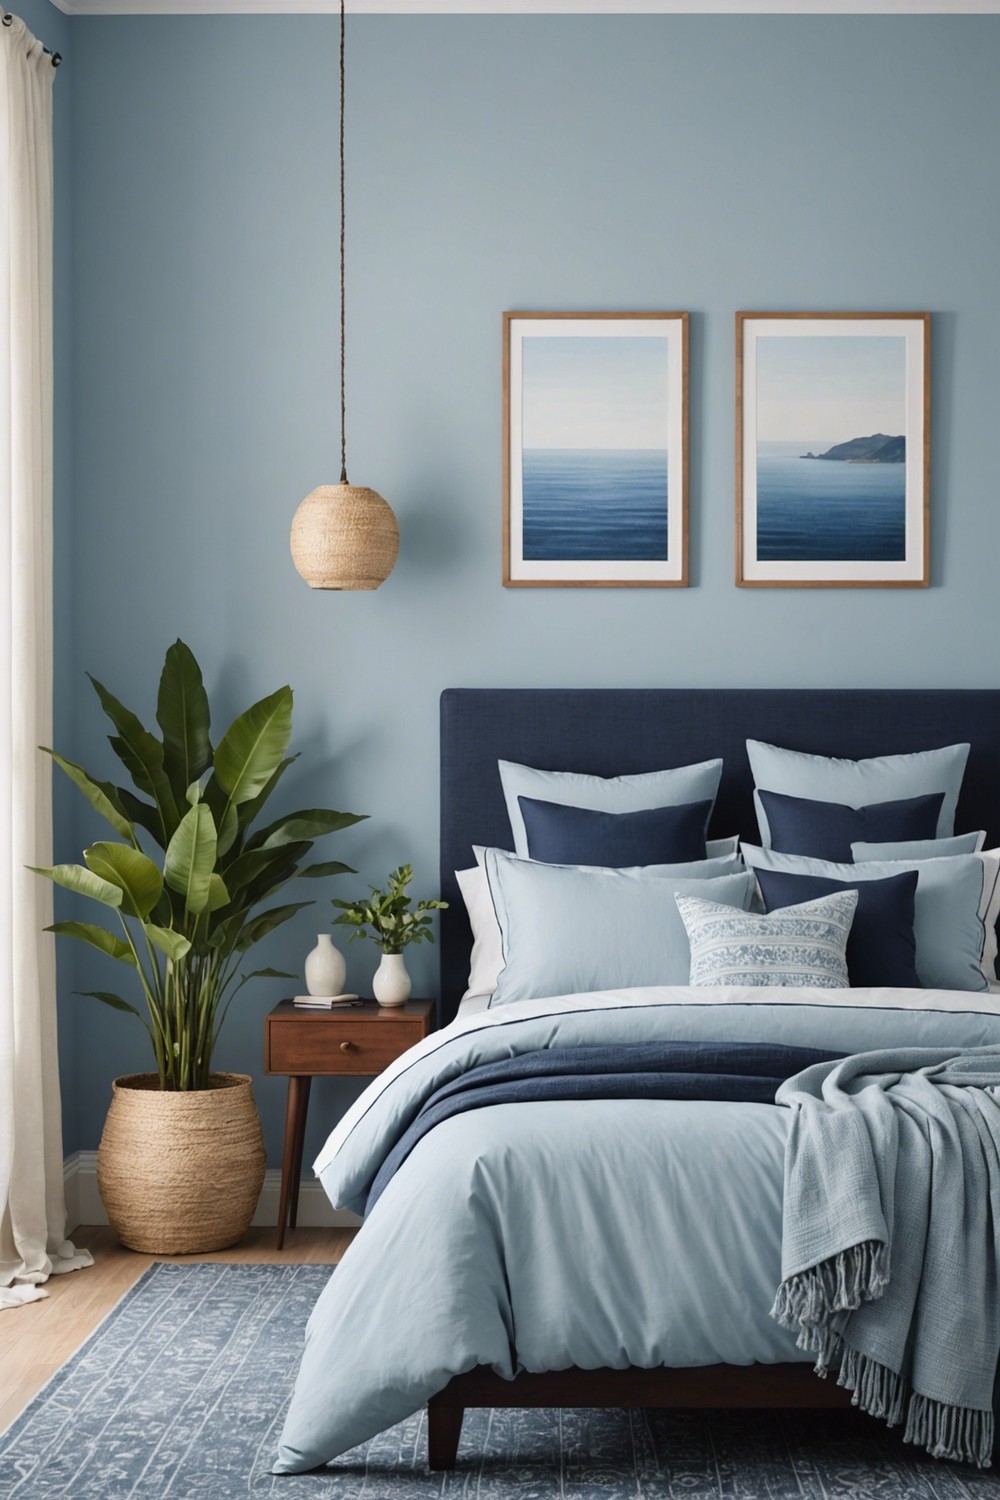 Bring in the Blues with Calming Colors